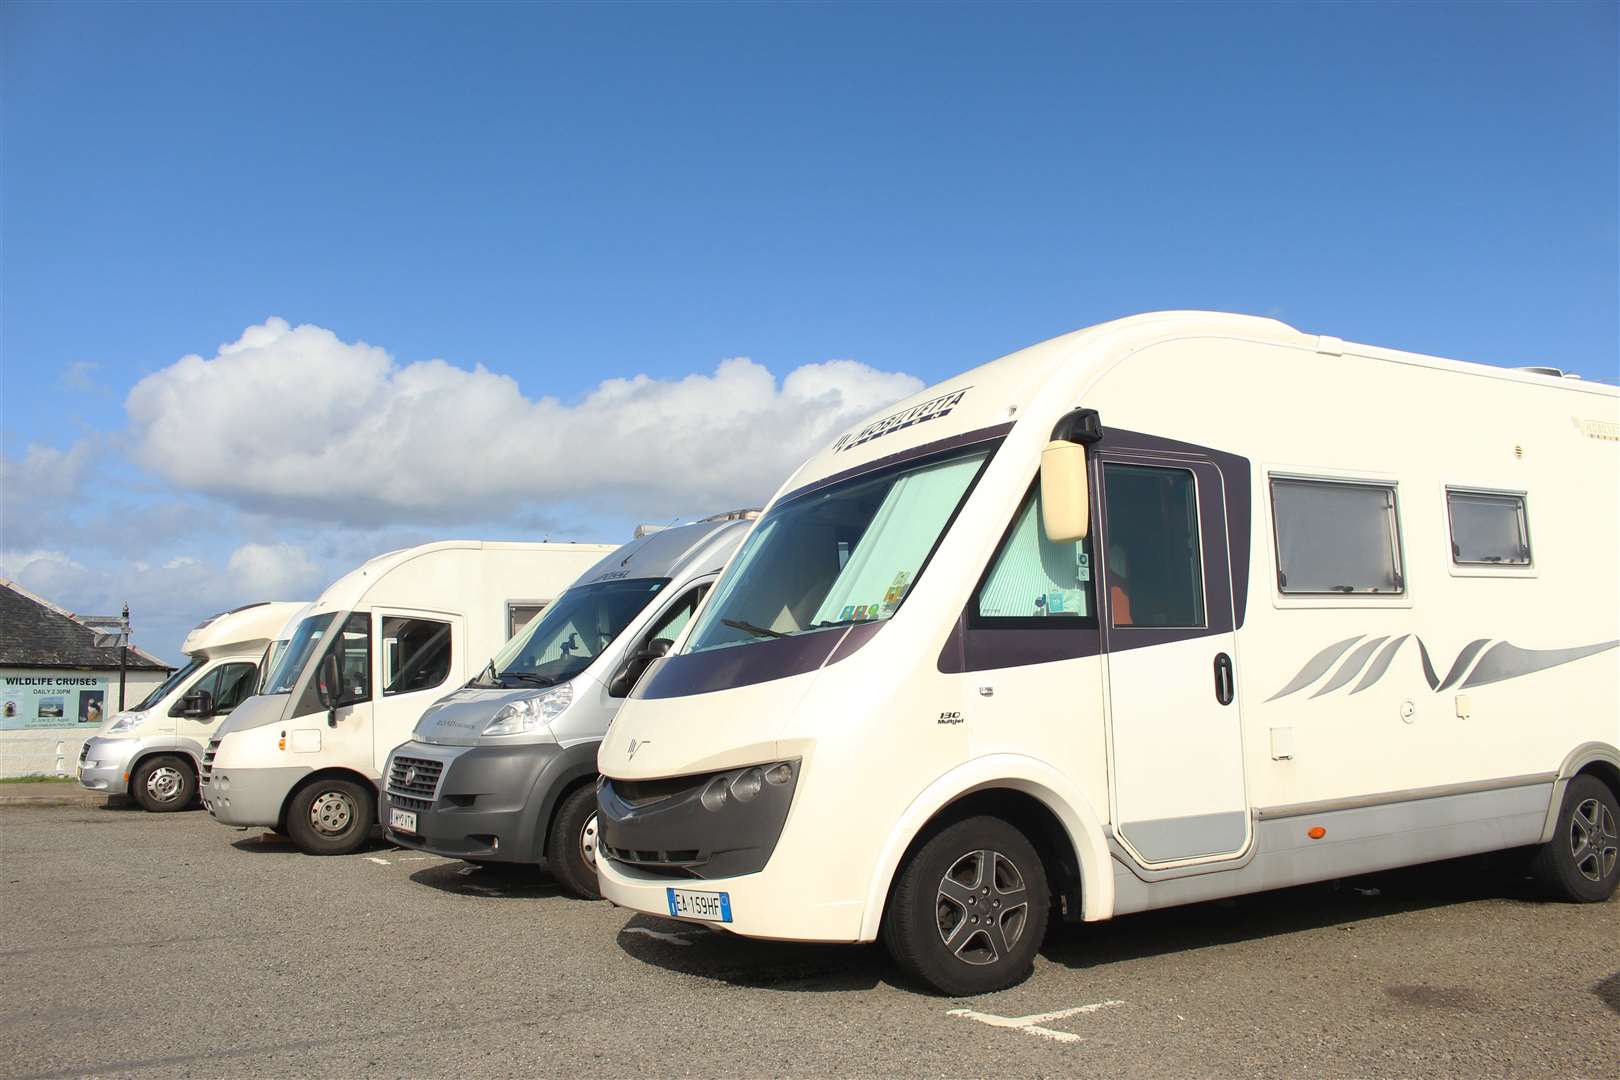 The NC500 route is popular with people in motorhomes.